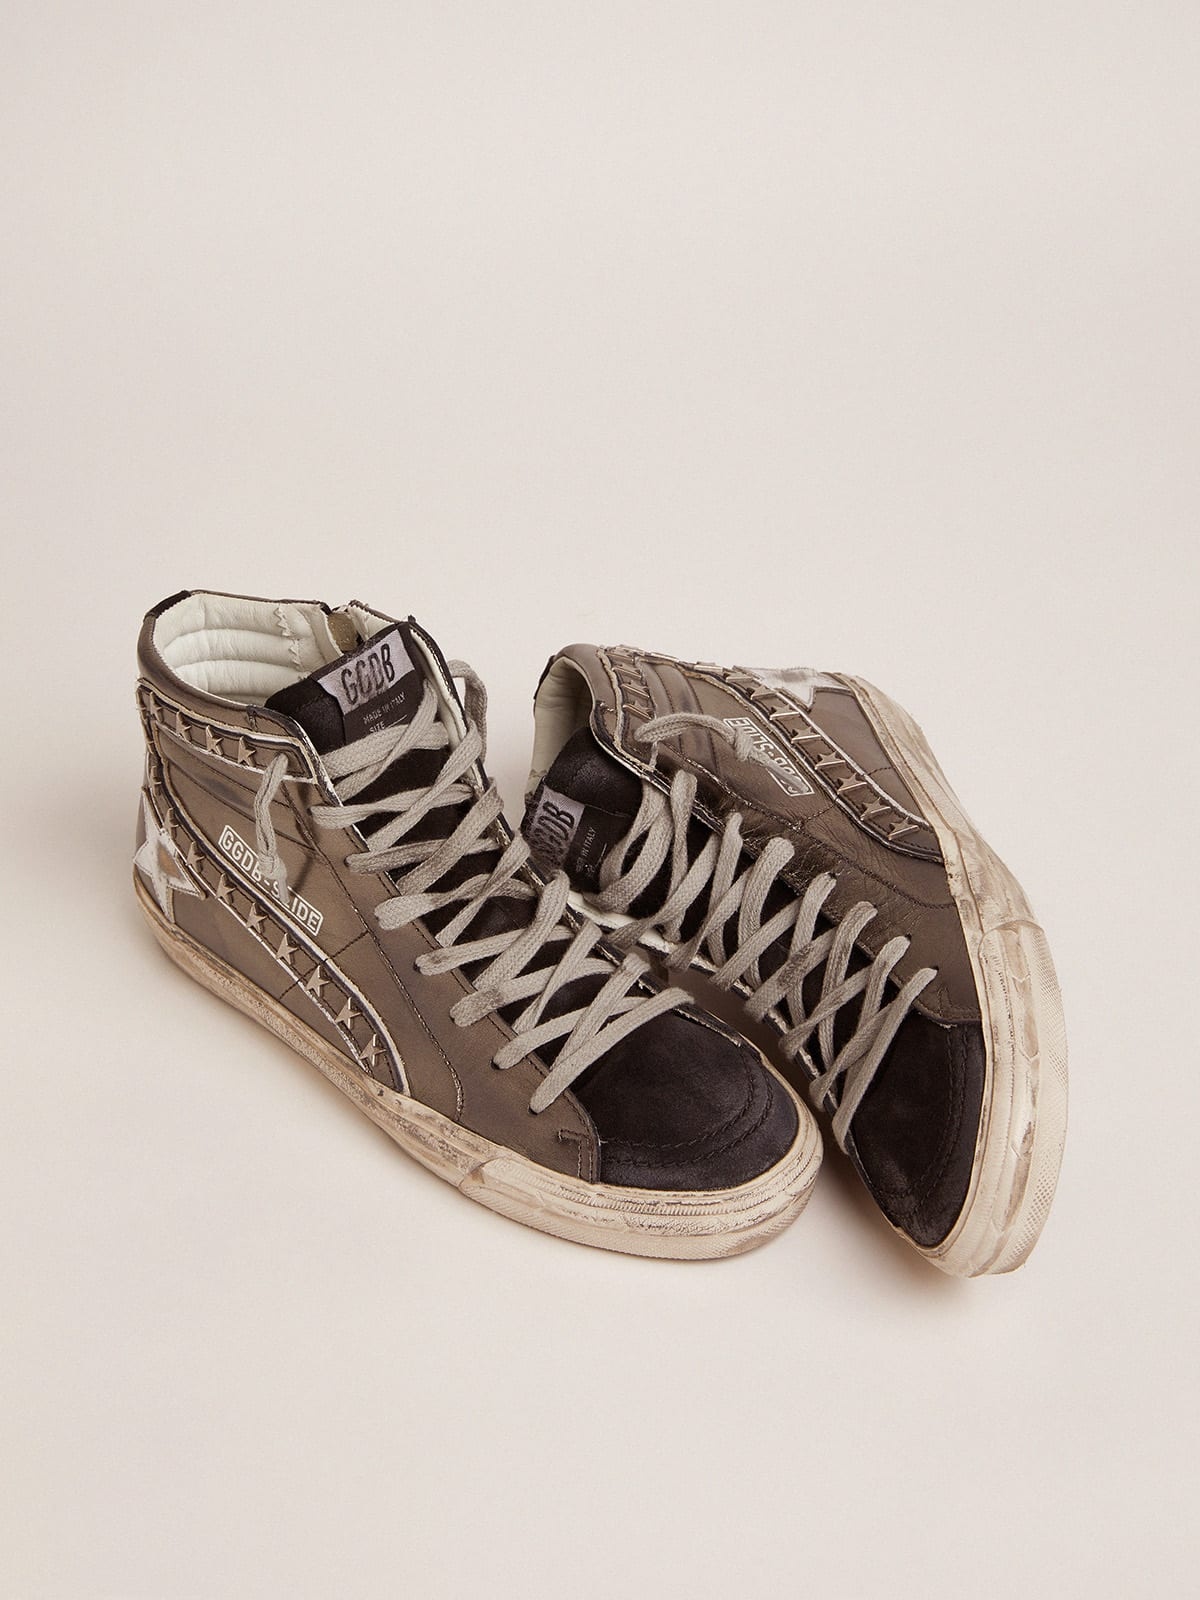 Slide sneakers with silver laminated leather upper and star-shaped studs - 2